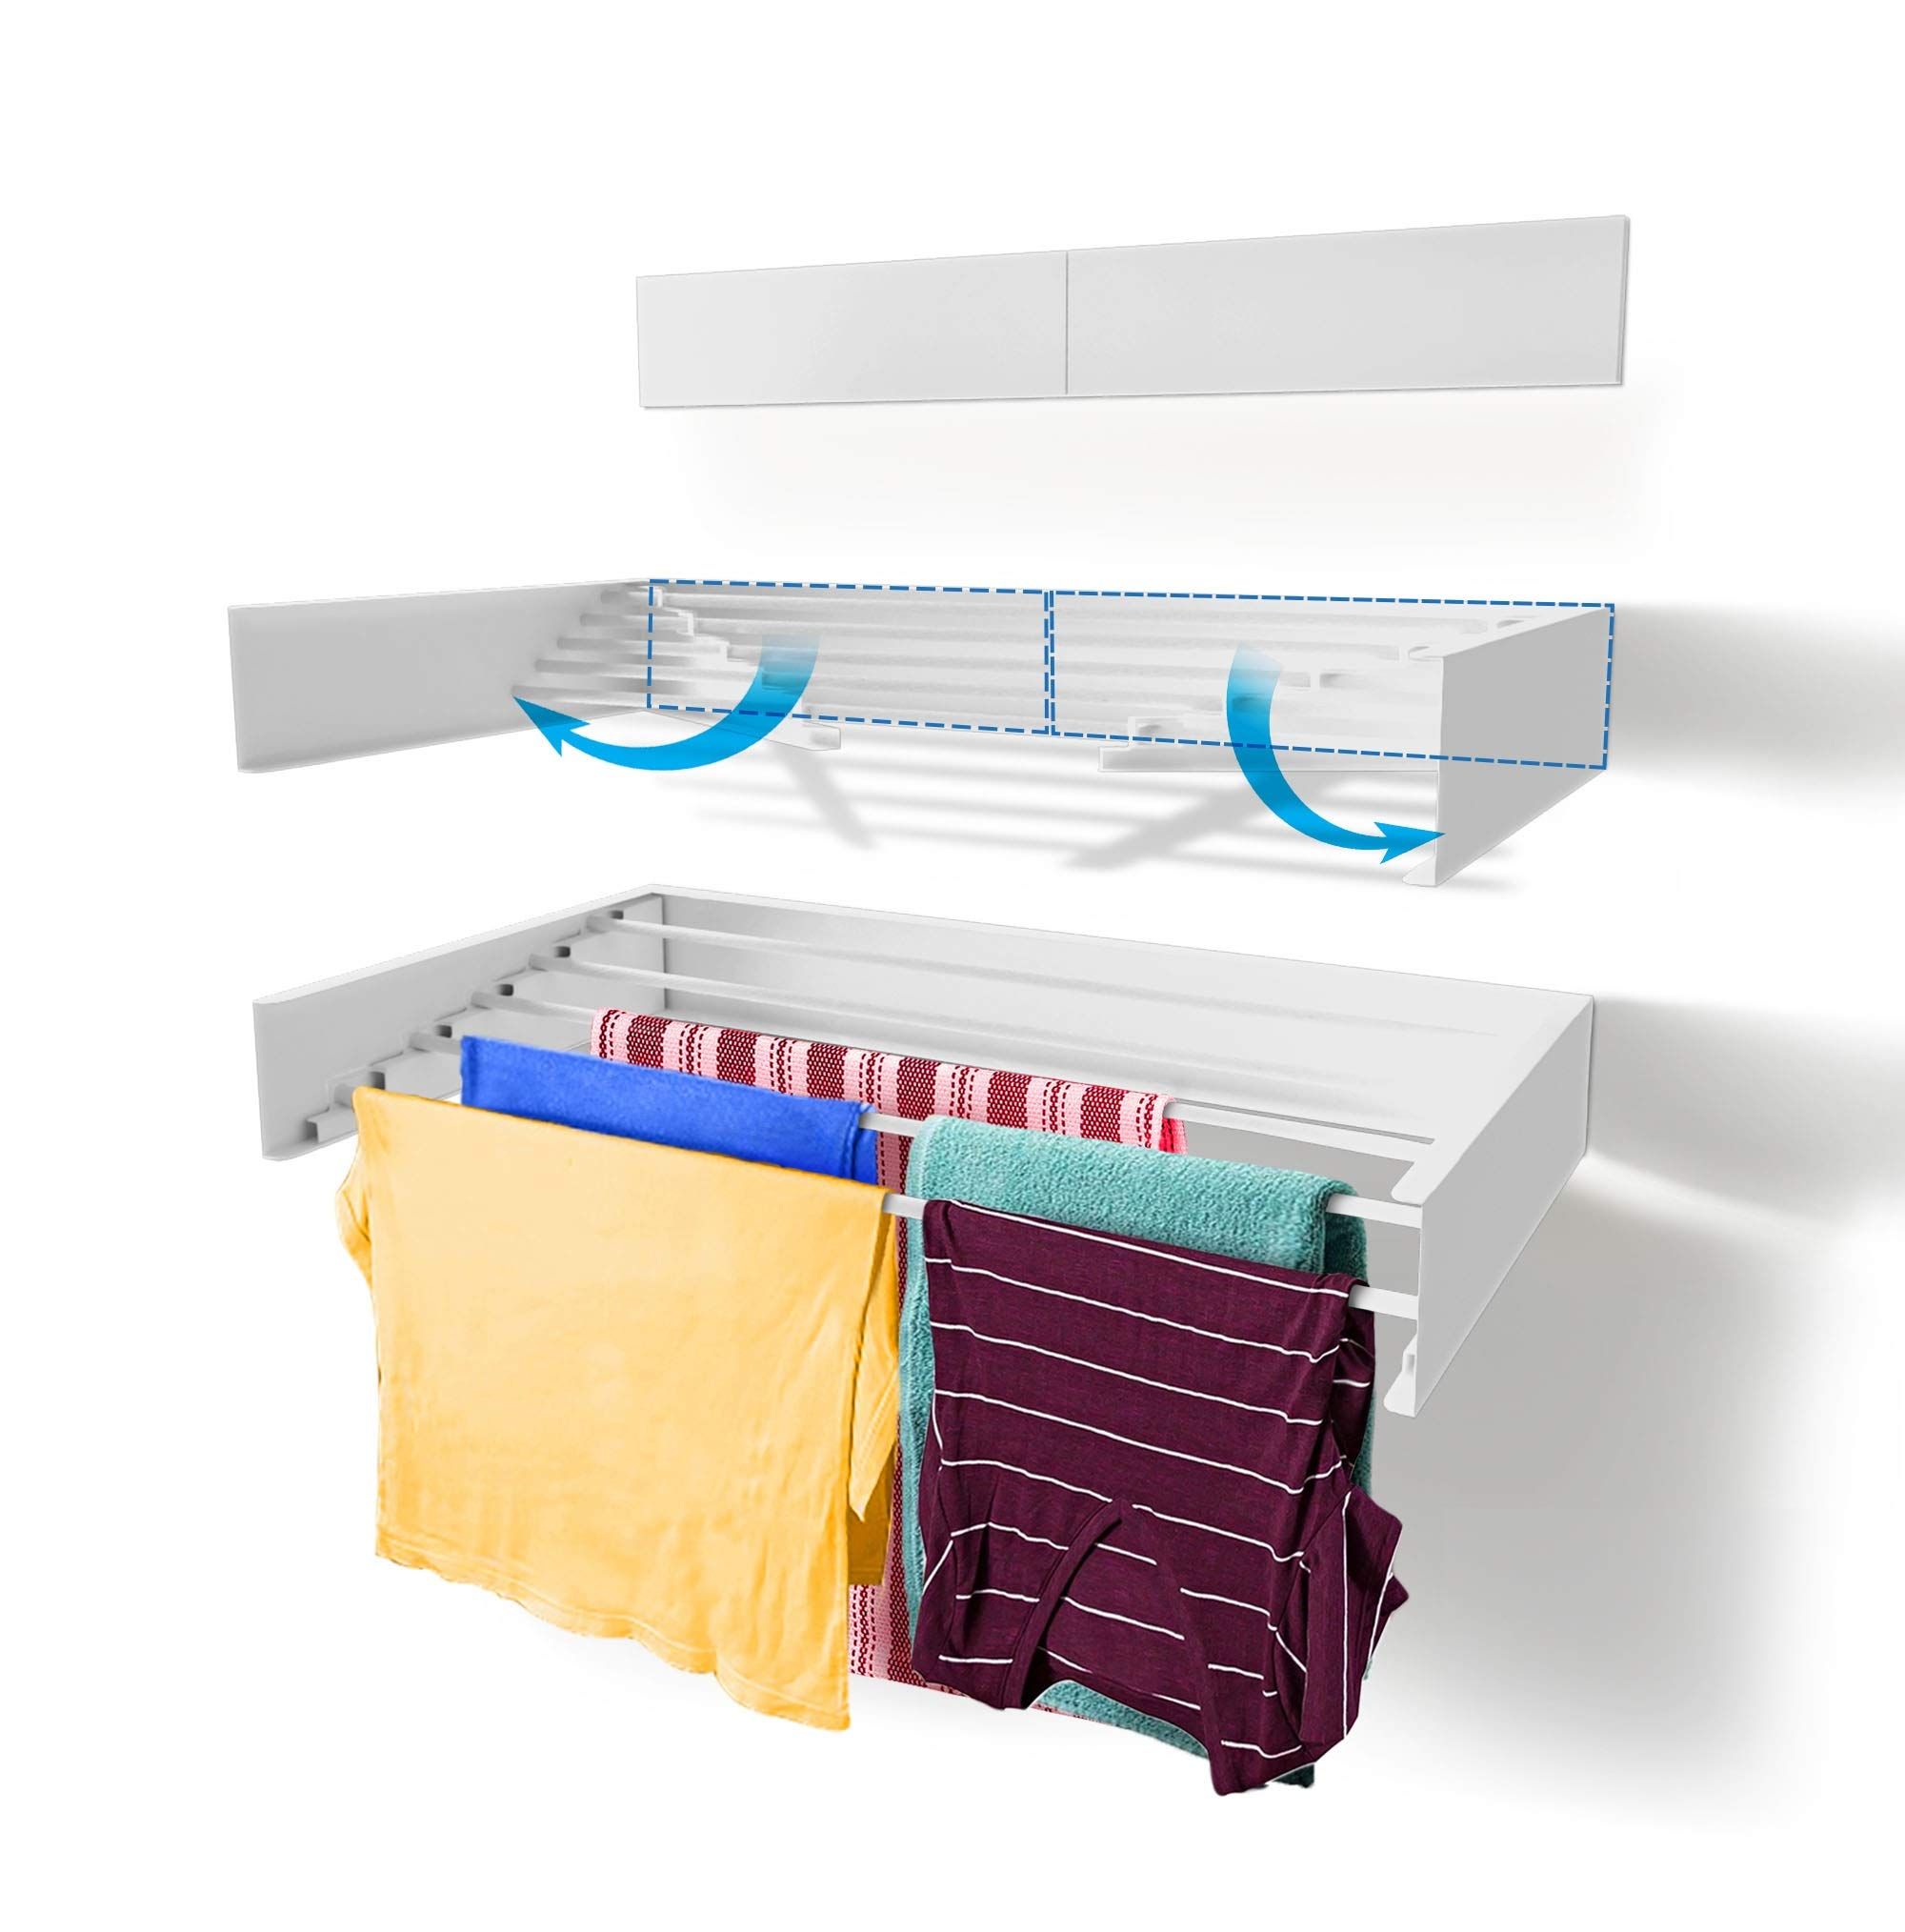 Laundry Drying Rack (28-INCH White), Wall Mounted, Retractable Clothes Drying Rack, 40lbs Capacity, 11.6 Linear Ft, with Wall Template and Long Screwdriver Bit | Amazon (US)